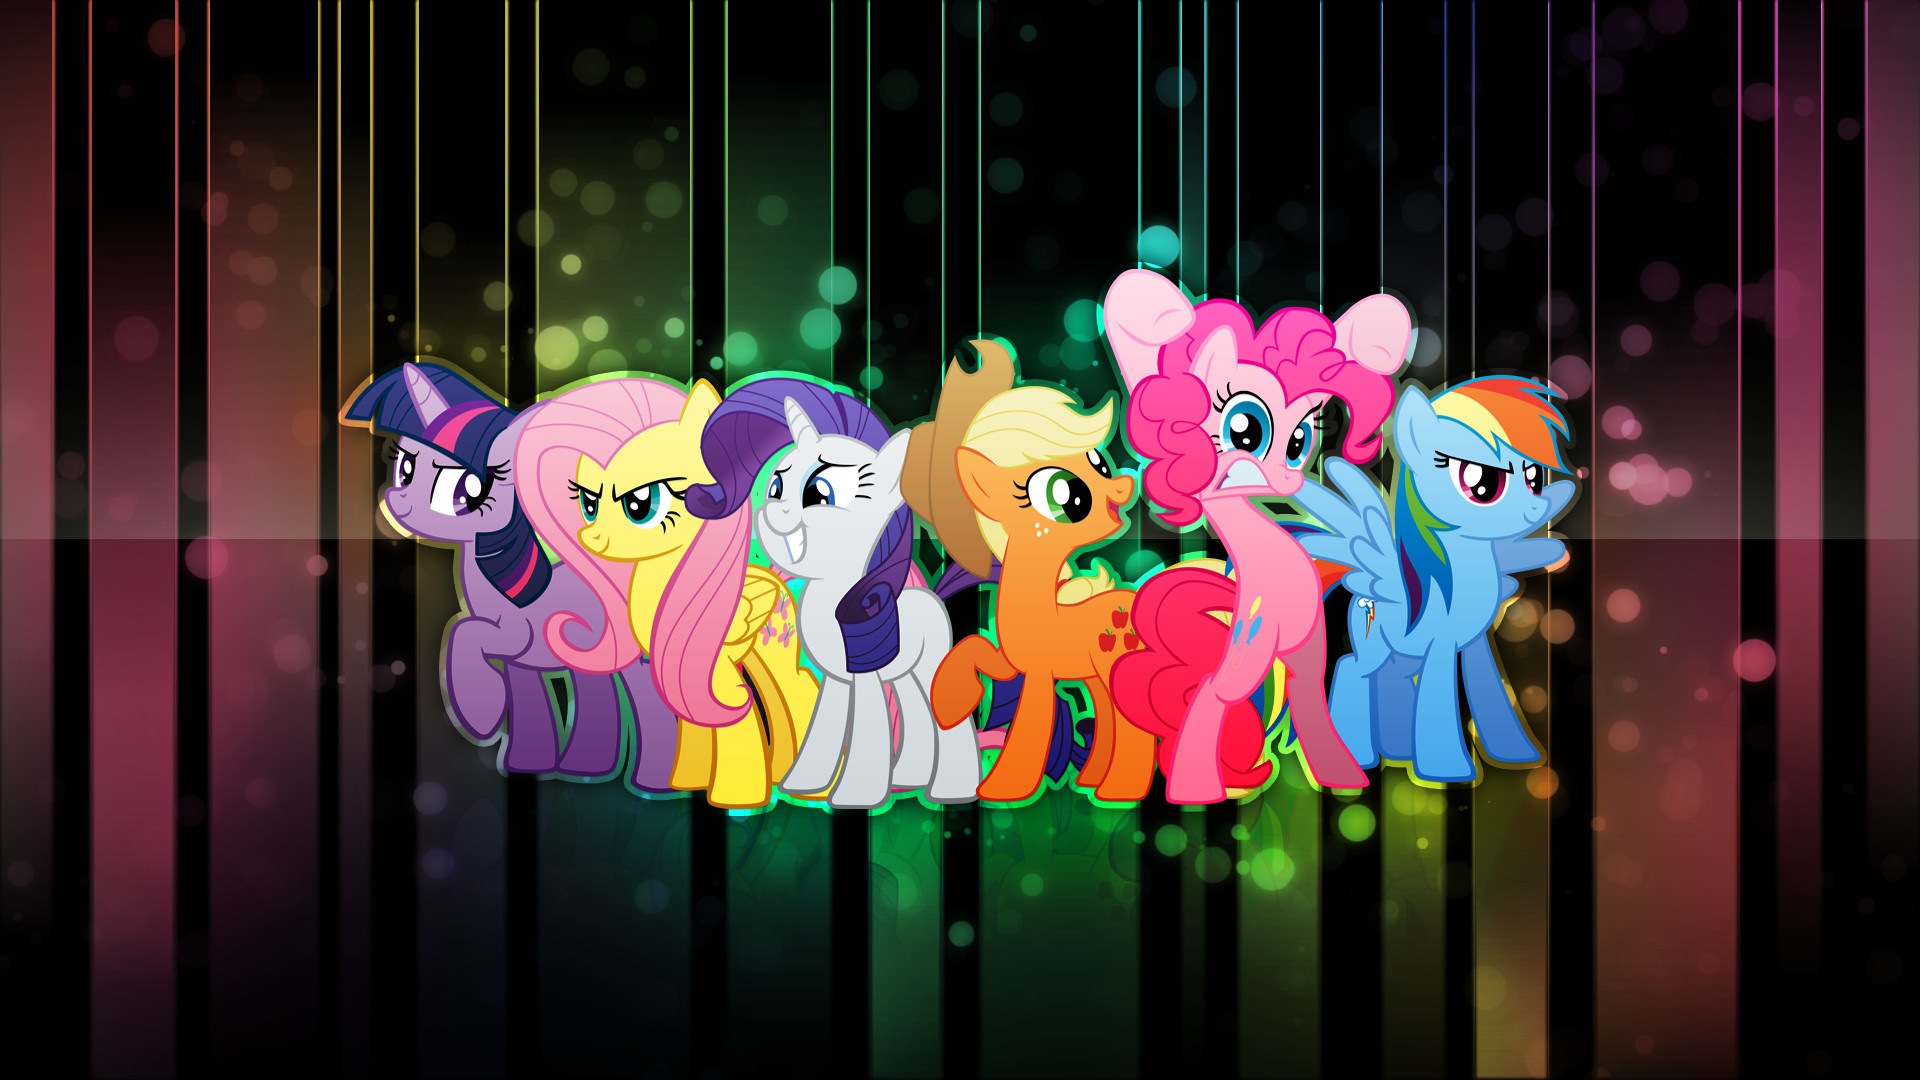 1920x1080  My Little Pony Backgrounds - Wallpaper Cave My Little Pony  Computer .